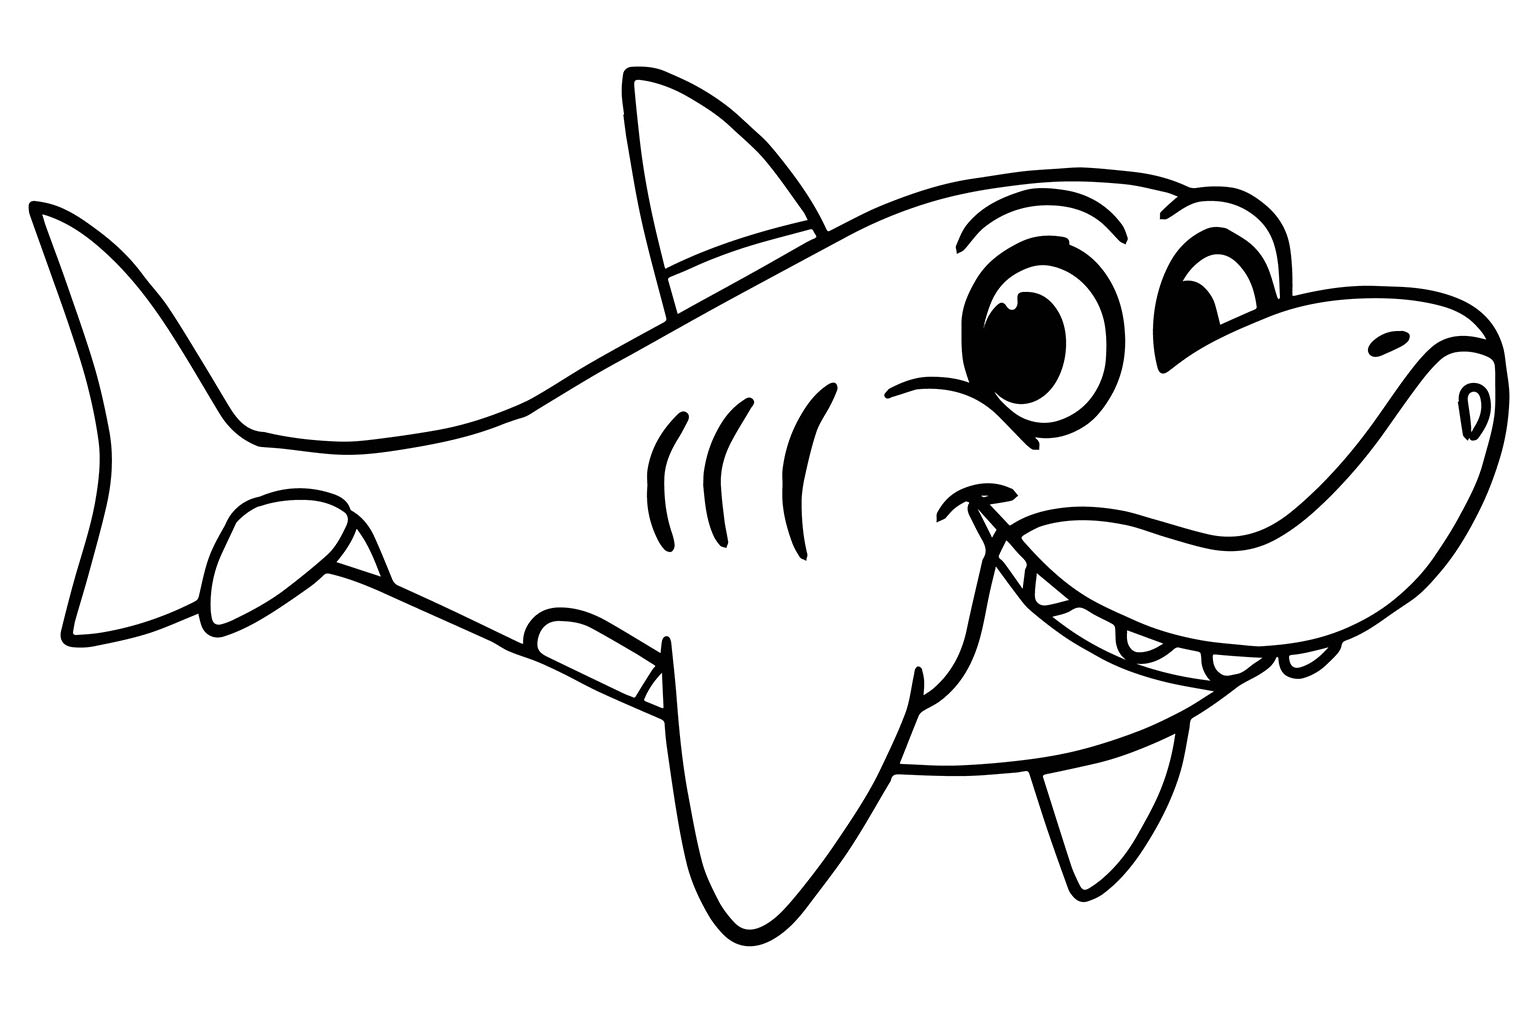 Sharks to color for children Sharks Kids Coloring Pages